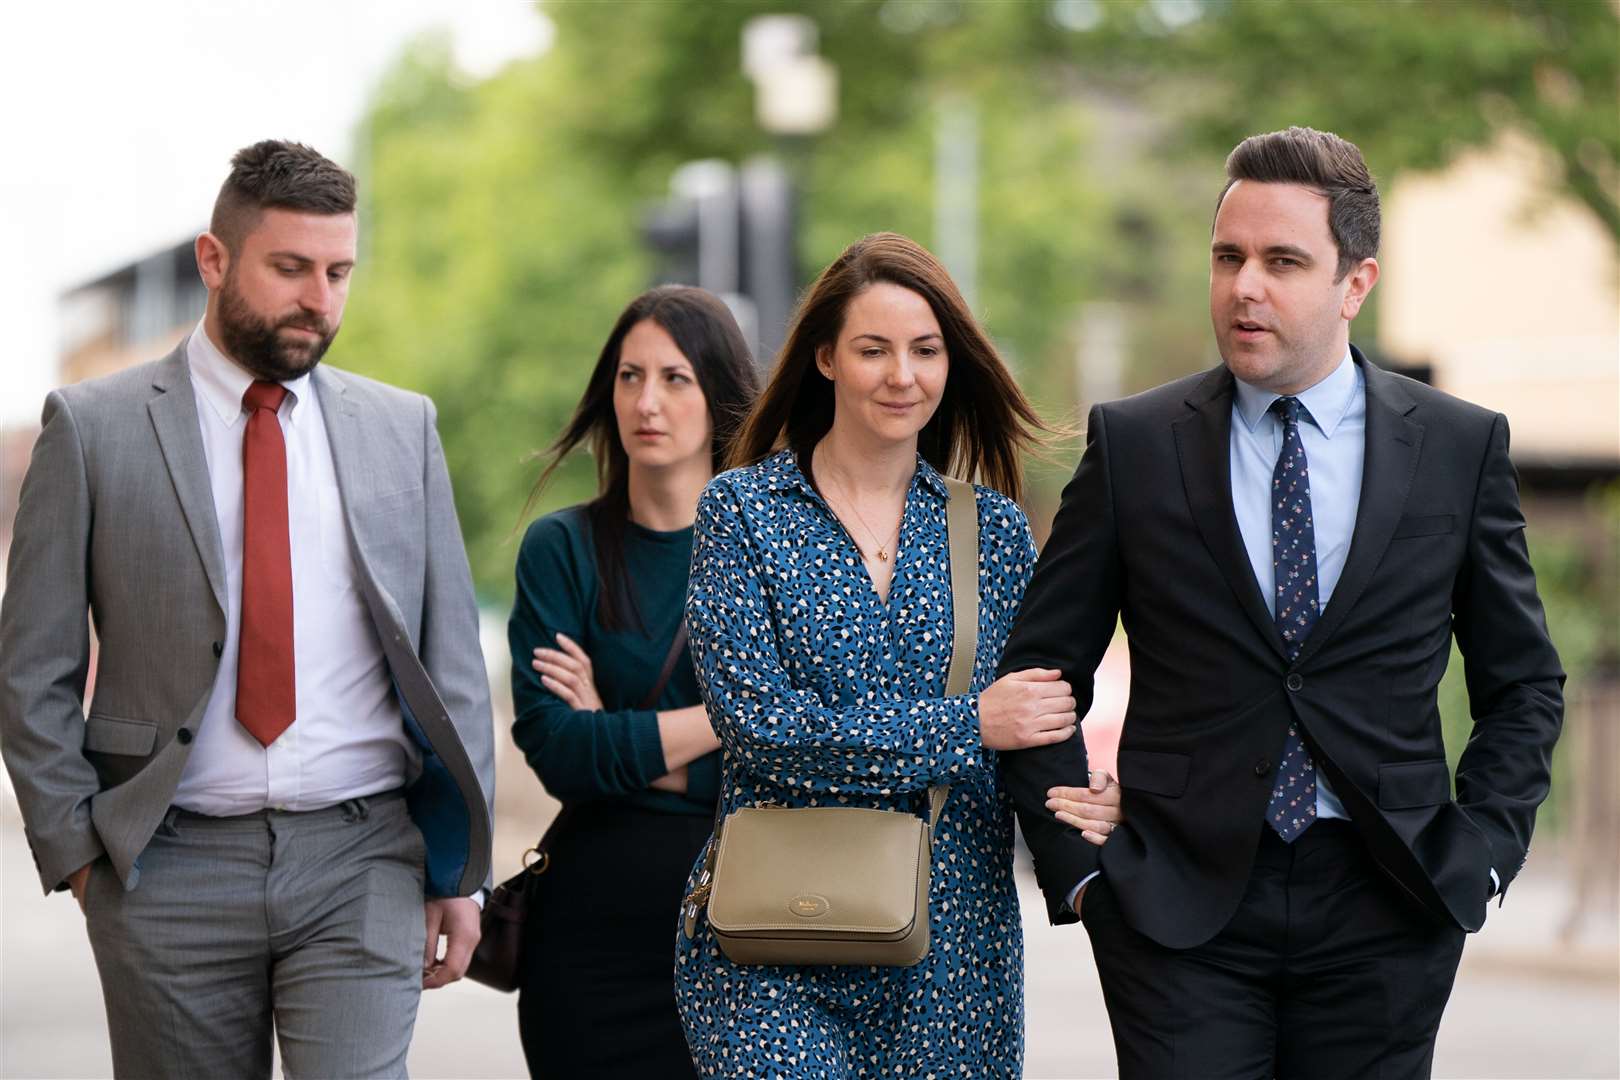 Chris and Rachael Thorold (right), parents of baby Louis, pictured arriving at a previous hearing at Cambridge Crown Court. (Joe Giddens/ PA)